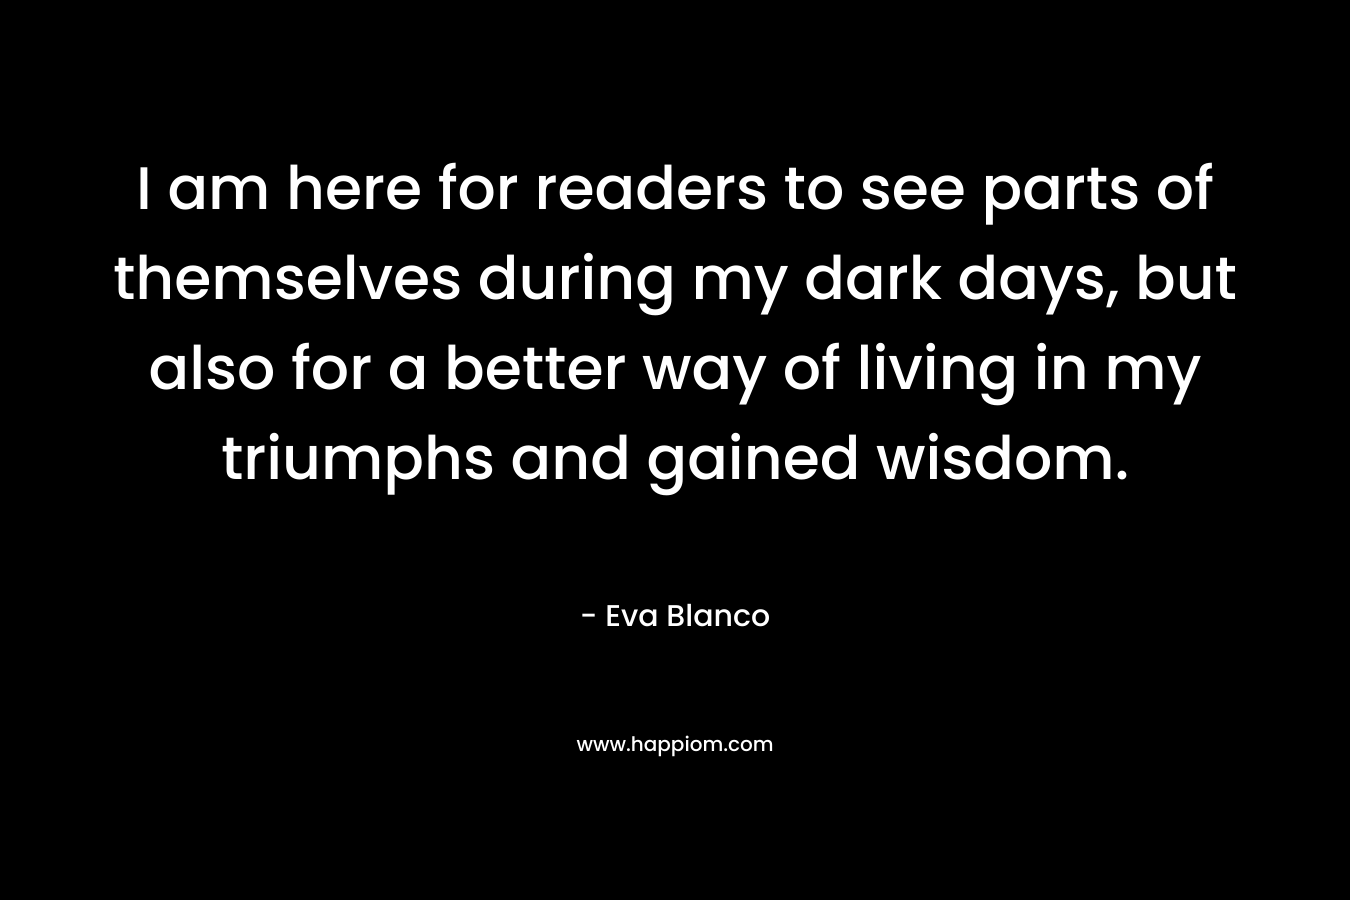 I am here for readers to see parts of themselves during my dark days, but also for a better way of living in my triumphs and gained wisdom. – Eva Blanco